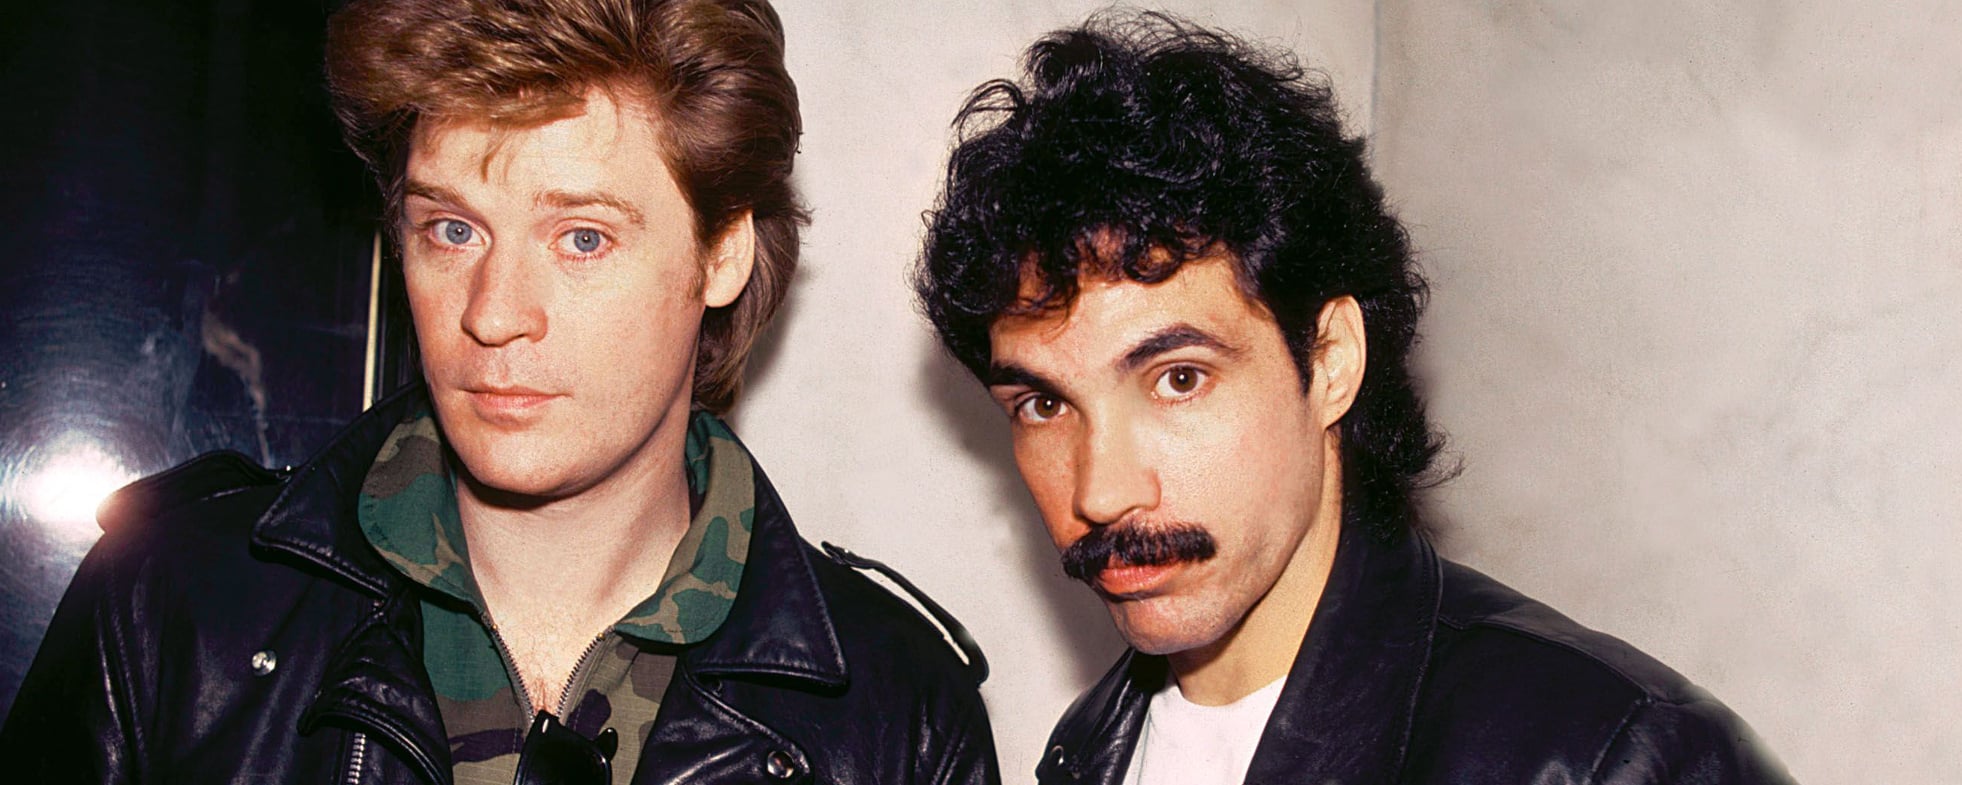 Behind the Song: Hall & Oates, “Maneater”